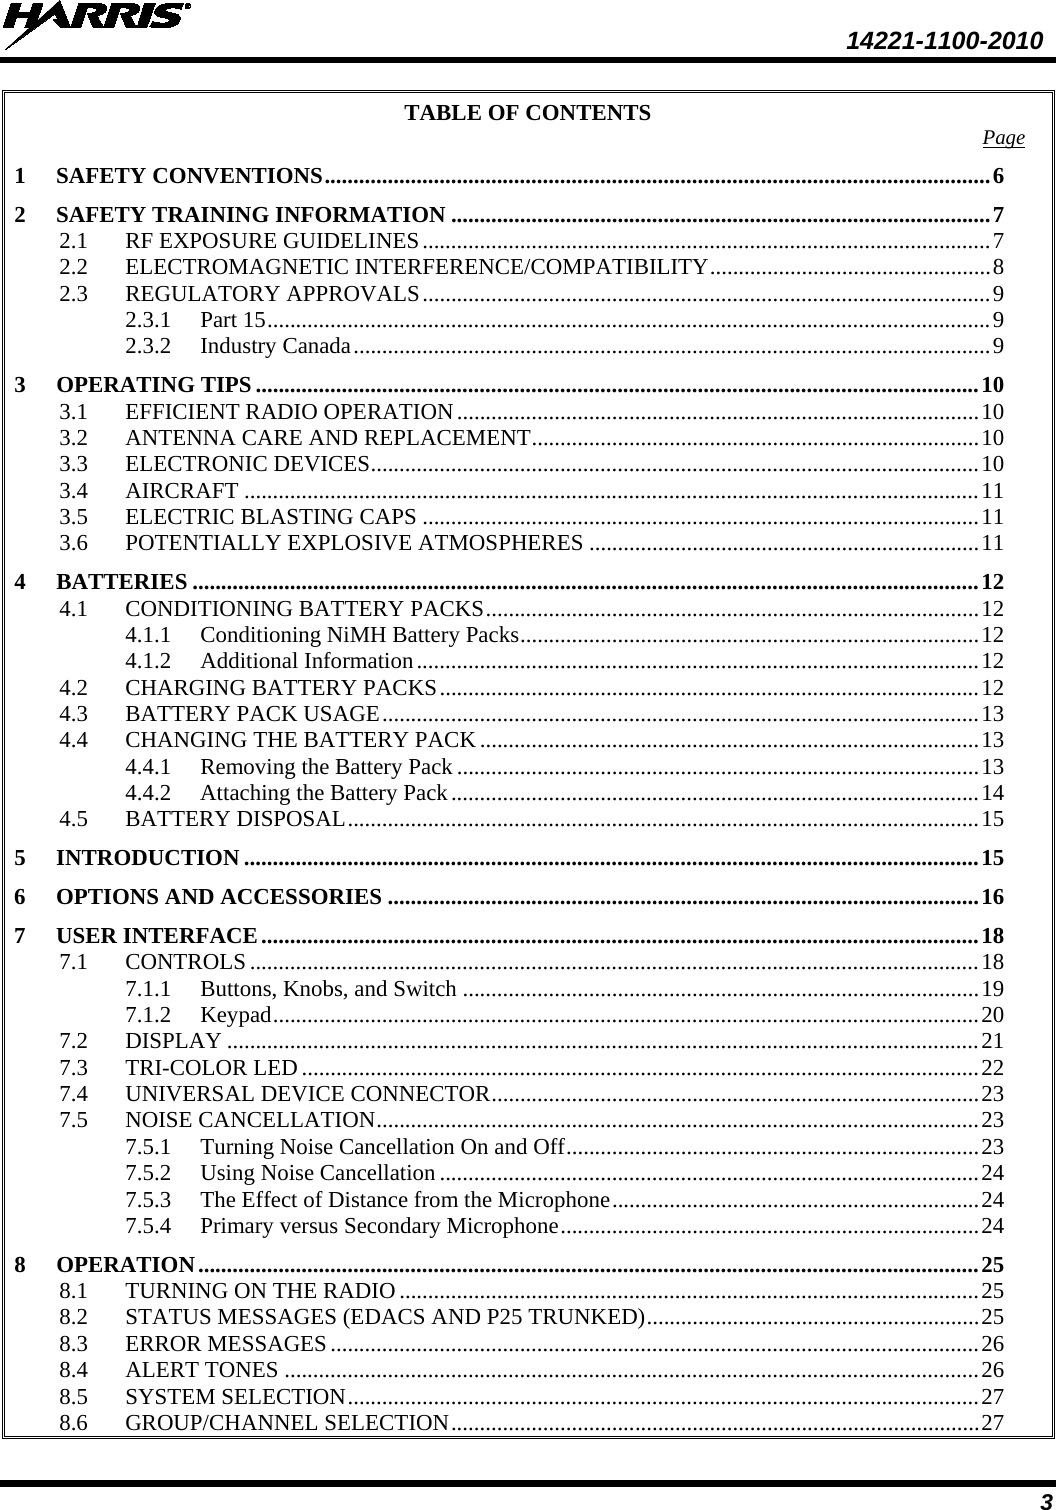  14221-1100-2010 3 TABLE OF CONTENTS Page 1 SAFETY CONVENTIONS .................................................................................................................... 6 2 SAFETY TRAINING INFORMATION .............................................................................................. 7 2.1 RF EXPOSURE GUIDELINES ................................................................................................... 7 2.2 ELECTROMAGNETIC INTERFERENCE/COMPATIBILITY ................................................. 8 2.3 REGULATORY APPROVALS ................................................................................................... 9 2.3.1 Part 15 .............................................................................................................................. 9 2.3.2 Industry Canada ............................................................................................................... 9 3 OPERATING TIPS .............................................................................................................................. 10 3.1 EFFICIENT RADIO OPERATION ........................................................................................... 10 3.2 ANTENNA CARE AND REPLACEMENT .............................................................................. 10 3.3 ELECTRONIC DEVICES .......................................................................................................... 10 3.4 AIRCRAFT ................................................................................................................................ 11 3.5 ELECTRIC BLASTING CAPS ................................................................................................. 11 3.6 POTENTIALLY EXPLOSIVE ATMOSPHERES .................................................................... 11 4 BATTERIES ......................................................................................................................................... 12 4.1 CONDITIONING BATTERY PACKS ...................................................................................... 12 4.1.1 Conditioning NiMH Battery Packs ................................................................................ 12 4.1.2 Additional Information .................................................................................................. 12 4.2 CHARGING BATTERY PACKS .............................................................................................. 12 4.3 BATTERY PACK USAGE ........................................................................................................ 13 4.4 CHANGING THE BATTERY PACK ....................................................................................... 13 4.4.1 Removing the Battery Pack ........................................................................................... 13 4.4.2 Attaching the Battery Pack ............................................................................................ 14 4.5 BATTERY DISPOSAL .............................................................................................................. 15 5 INTRODUCTION ................................................................................................................................ 15 6 OPTIONS AND ACCESSORIES ....................................................................................................... 16 7 USER INTERFACE ............................................................................................................................. 18 7.1 CONTROLS ............................................................................................................................... 18 7.1.1 Buttons, Knobs, and Switch .......................................................................................... 19 7.1.2 Keypad ........................................................................................................................... 20 7.2 DISPLAY ................................................................................................................................... 21 7.3 TRI-COLOR LED ...................................................................................................................... 22 7.4 UNIVERSAL DEVICE CONNECTOR ..................................................................................... 23 7.5 NOISE CANCELLATION ......................................................................................................... 23 7.5.1 Turning Noise Cancellation On and Off ........................................................................ 23 7.5.2 Using Noise Cancellation .............................................................................................. 24 7.5.3 The Effect of Distance from the Microphone ................................................................ 24 7.5.4 Primary versus Secondary Microphone ......................................................................... 24 8 OPERATION ........................................................................................................................................ 25 8.1 TURNING ON THE RADIO ..................................................................................................... 25 8.2 STATUS MESSAGES (EDACS AND P25 TRUNKED) .......................................................... 25 8.3 ERROR MESSAGES ................................................................................................................. 26 8.4 ALERT TONES ......................................................................................................................... 26 8.5 SYSTEM SELECTION .............................................................................................................. 27 8.6 GROUP/CHANNEL SELECTION ............................................................................................ 27 